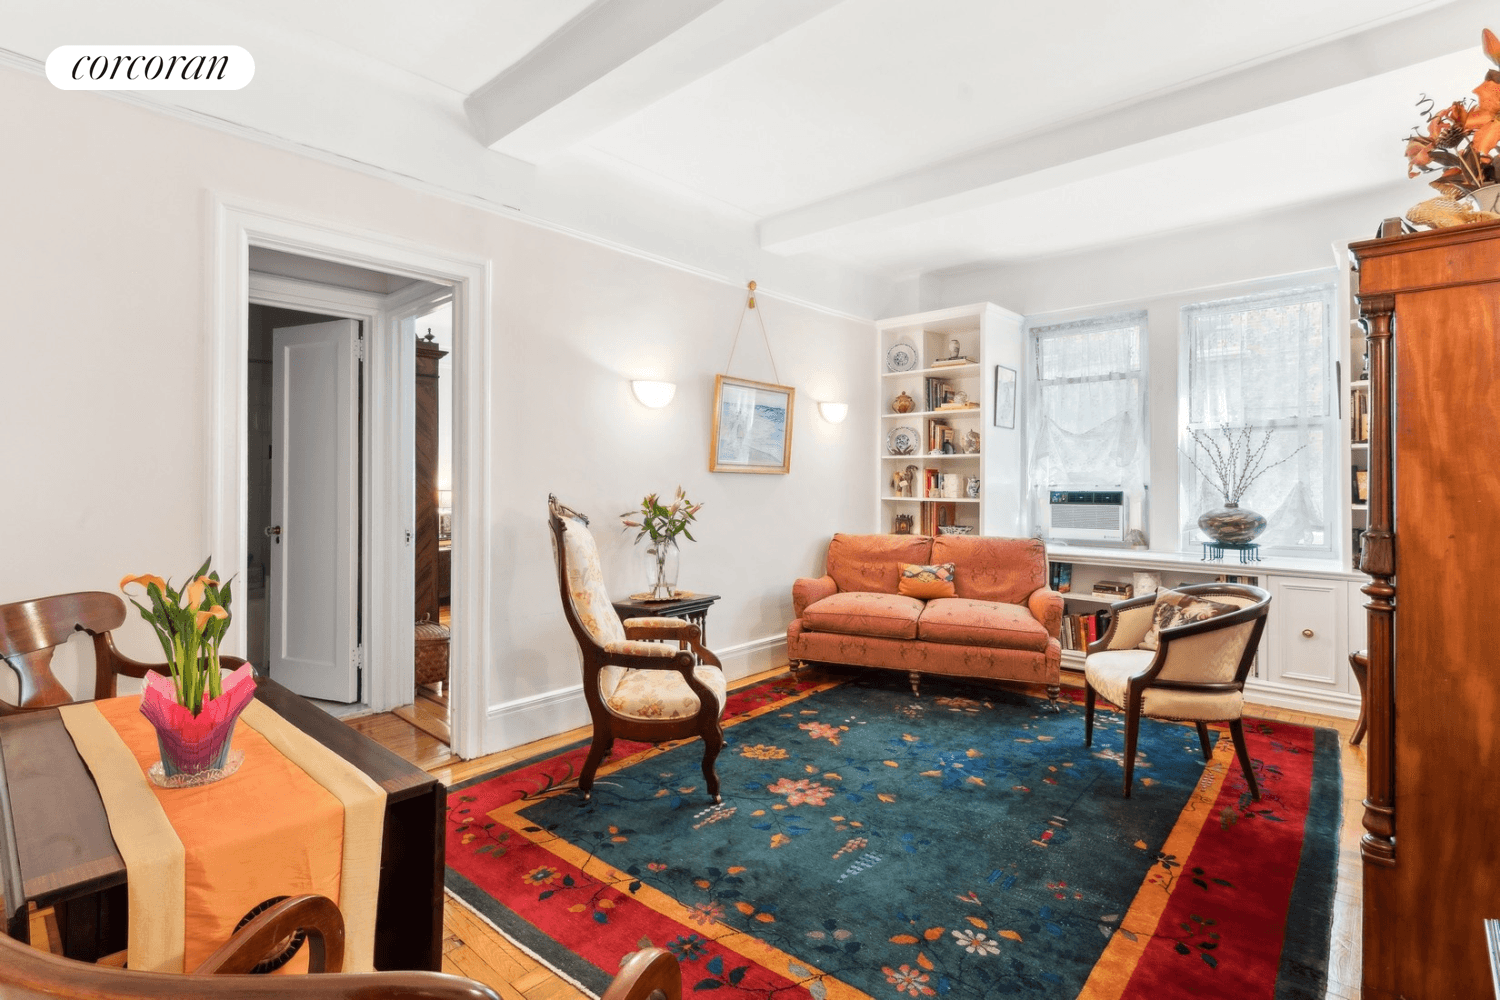 Oversized Upper West Side Prewar 1 BedroomThis spacious and private mezzanine level 1 bedroom home is in pristine condition and has a long list of features and amenities that include ...